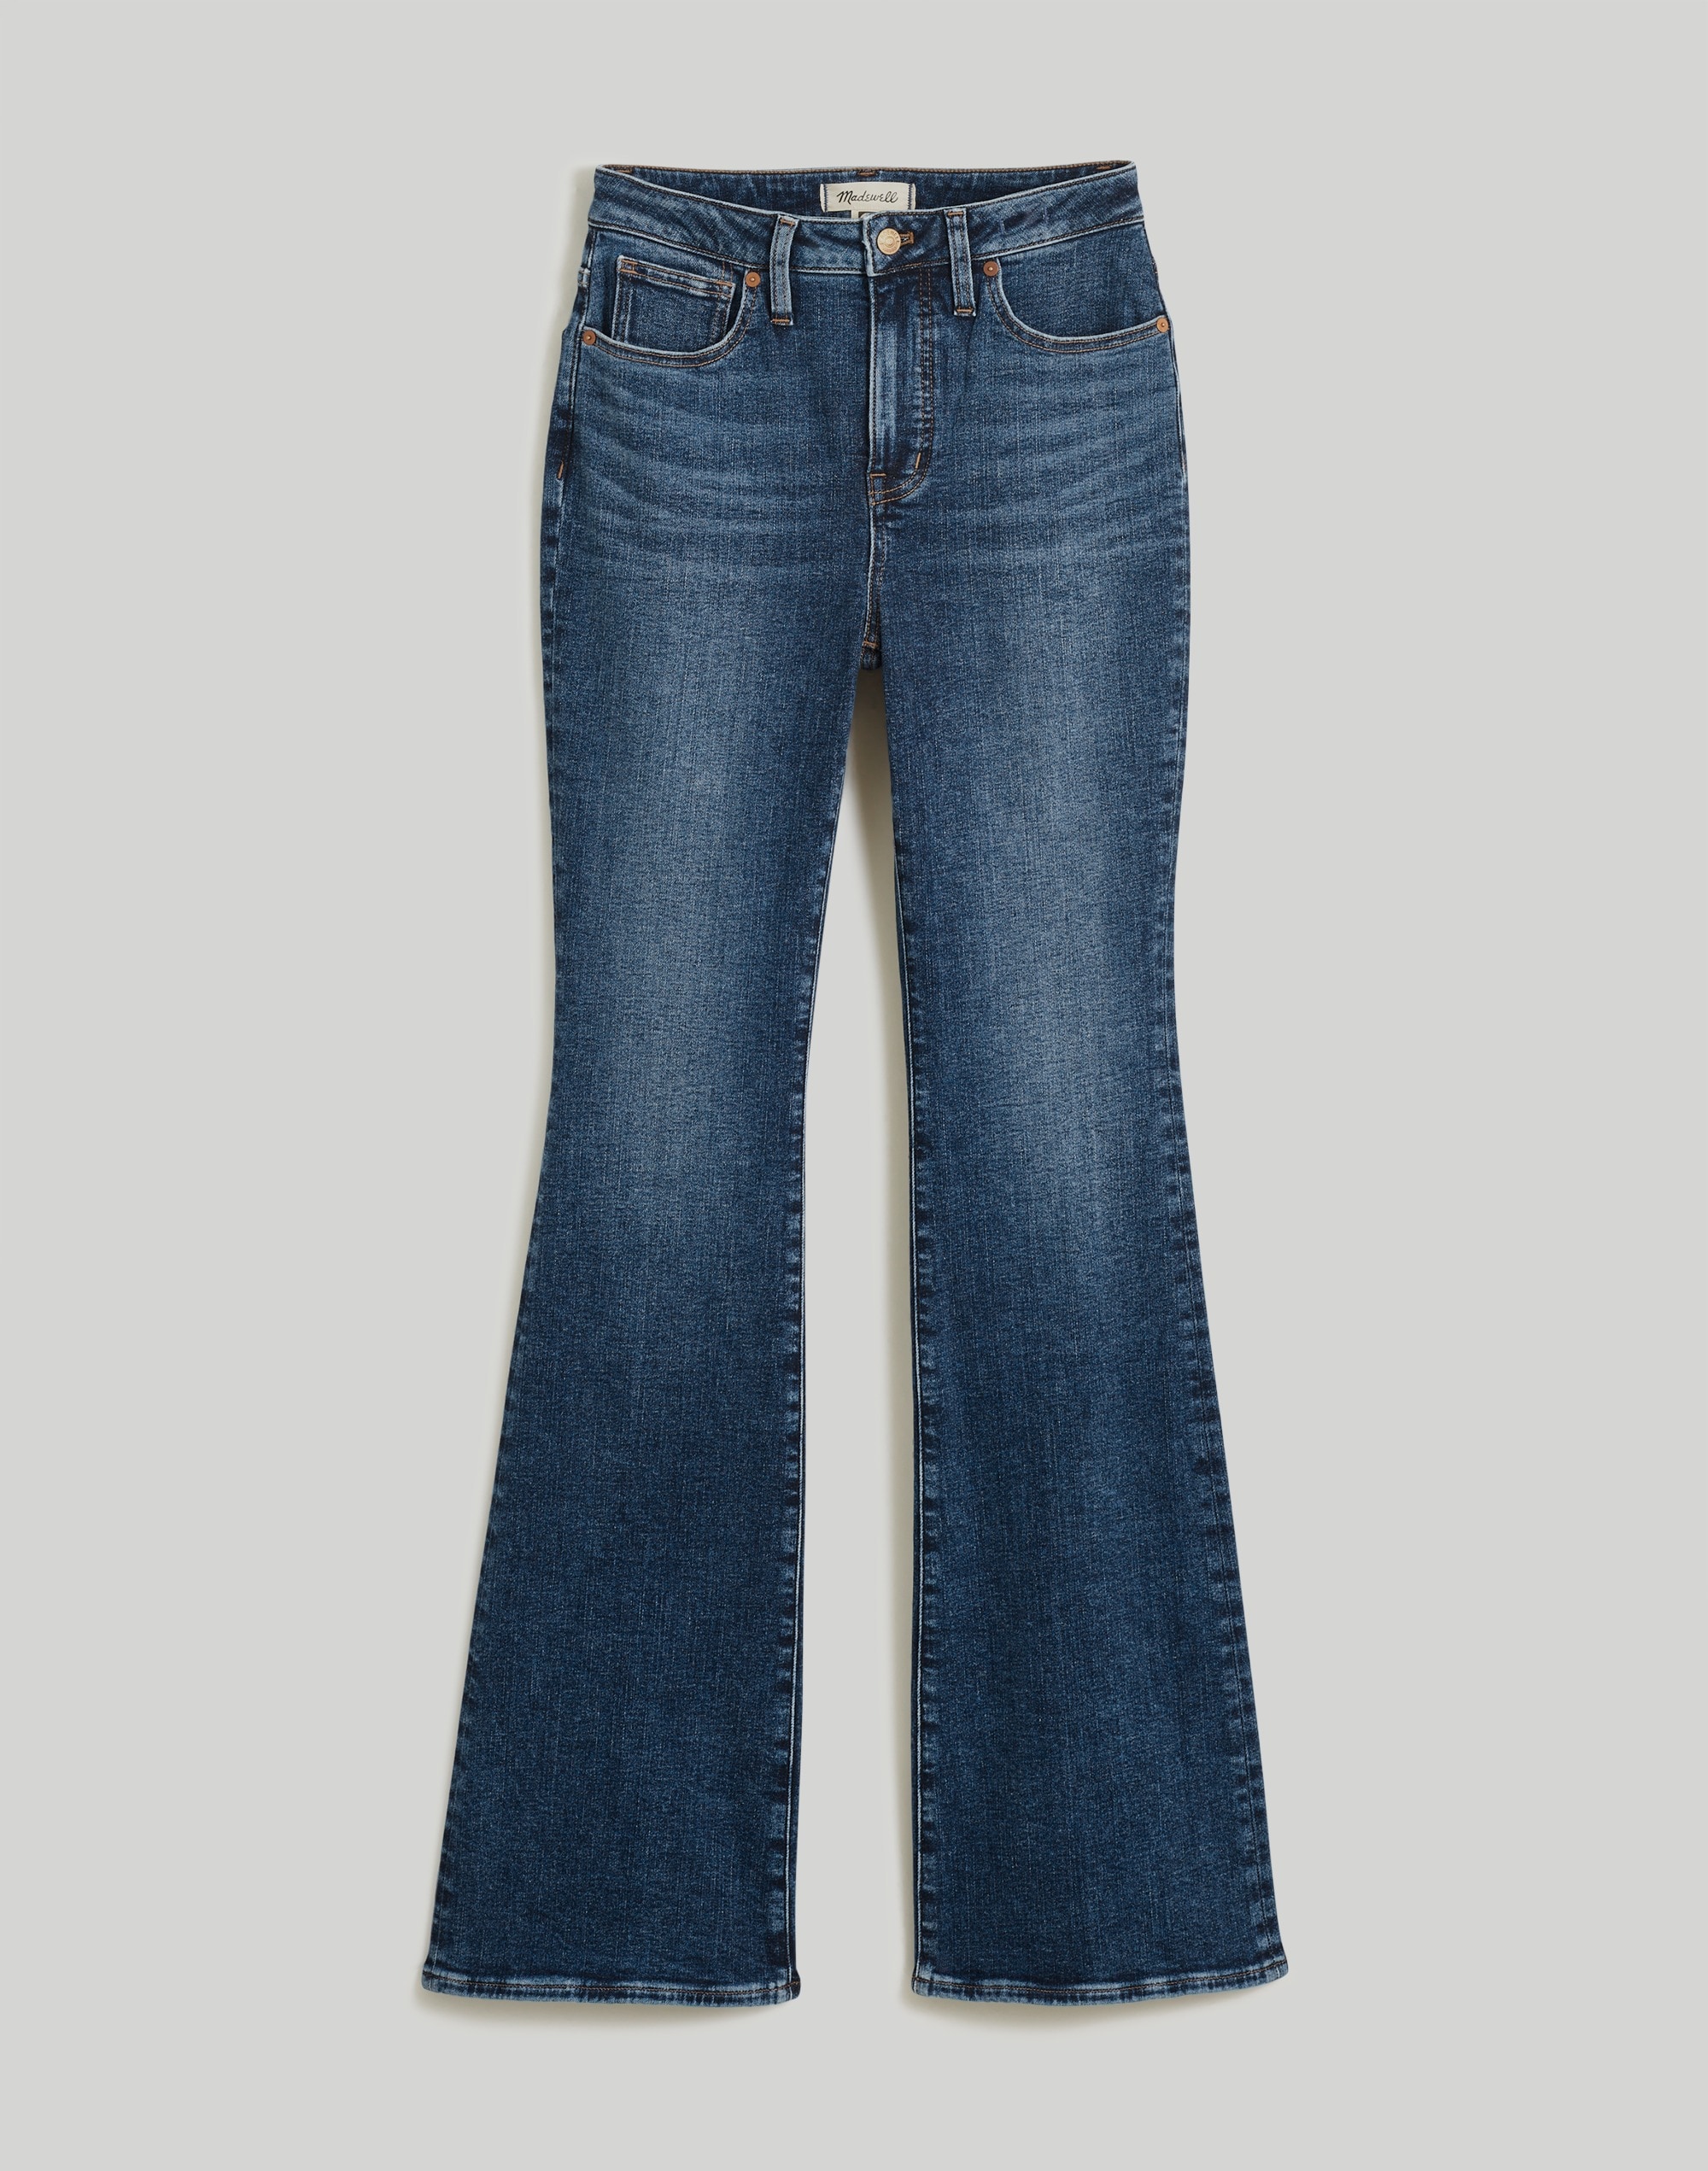 Curvy Skinny Flare Jeans in Alvord Wash: Instacozy Edition